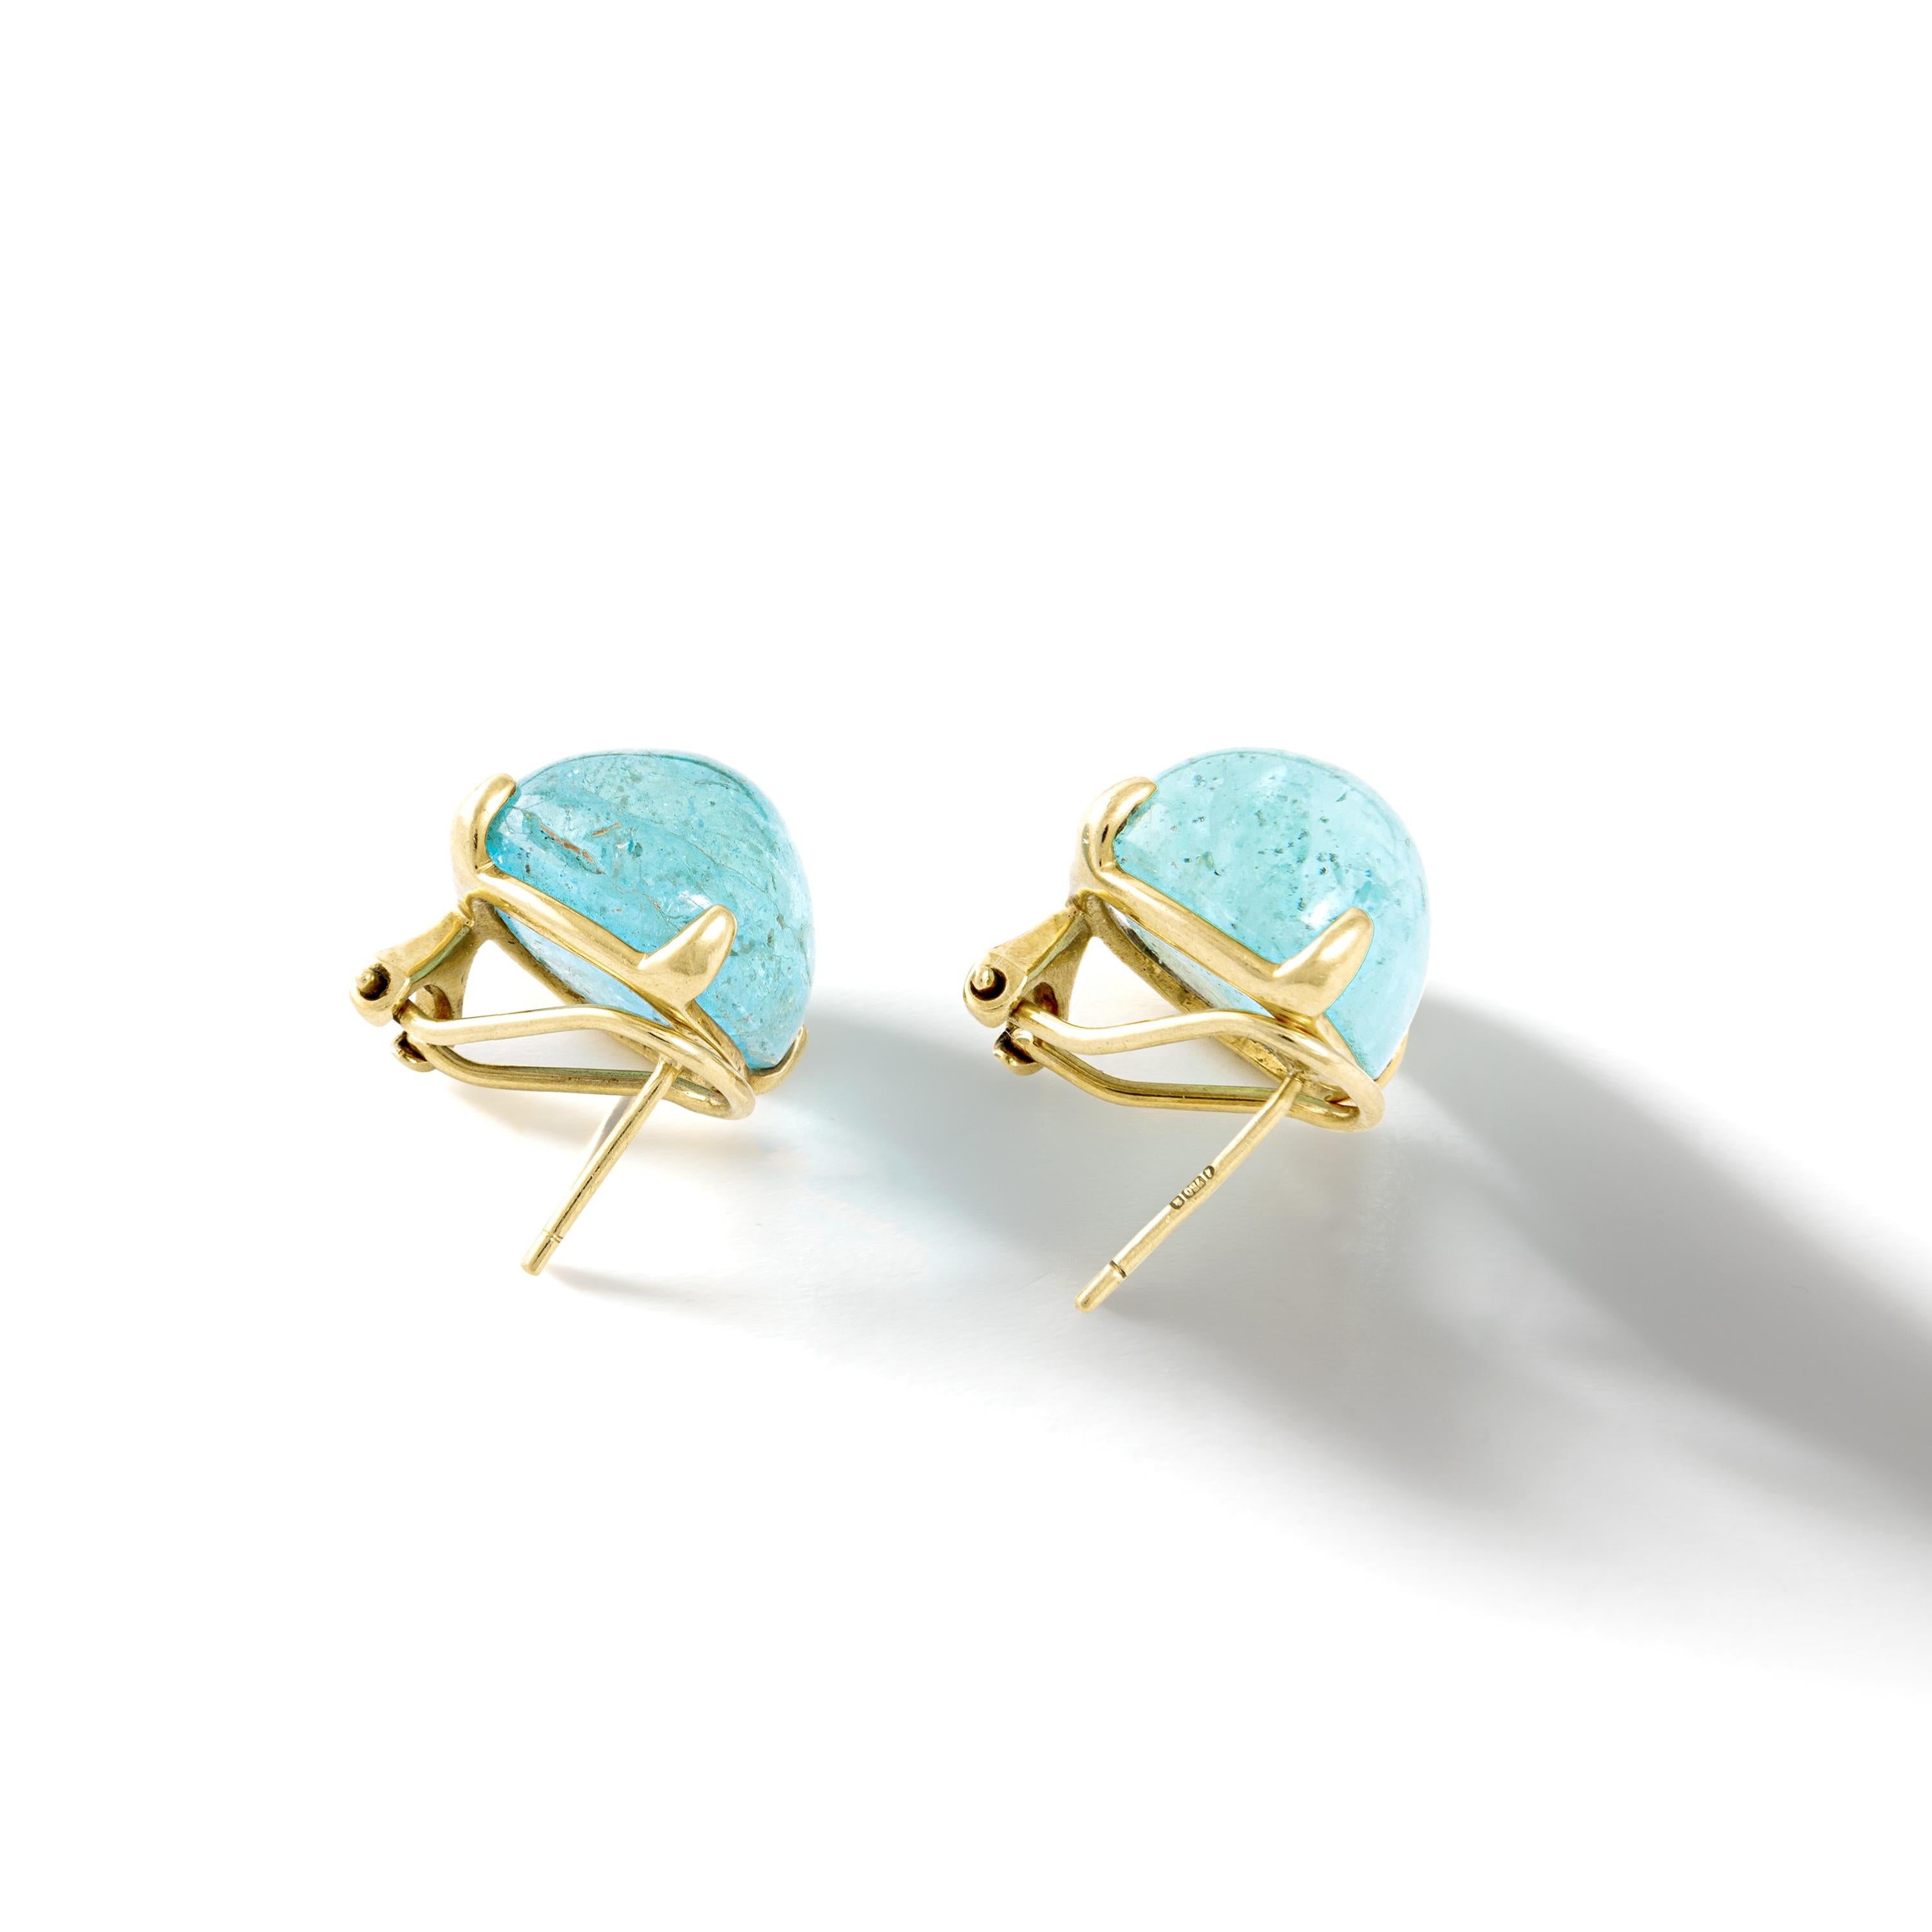 Cabochon Aquamarine on Yellow Gold 18k Ear clips.

Total height: 0.47 inch (1.20 centimeter).
Total width: 0.47 inch (1.20 centimeter).
Total thickness: 0.39 inch (1.00 centimeter).